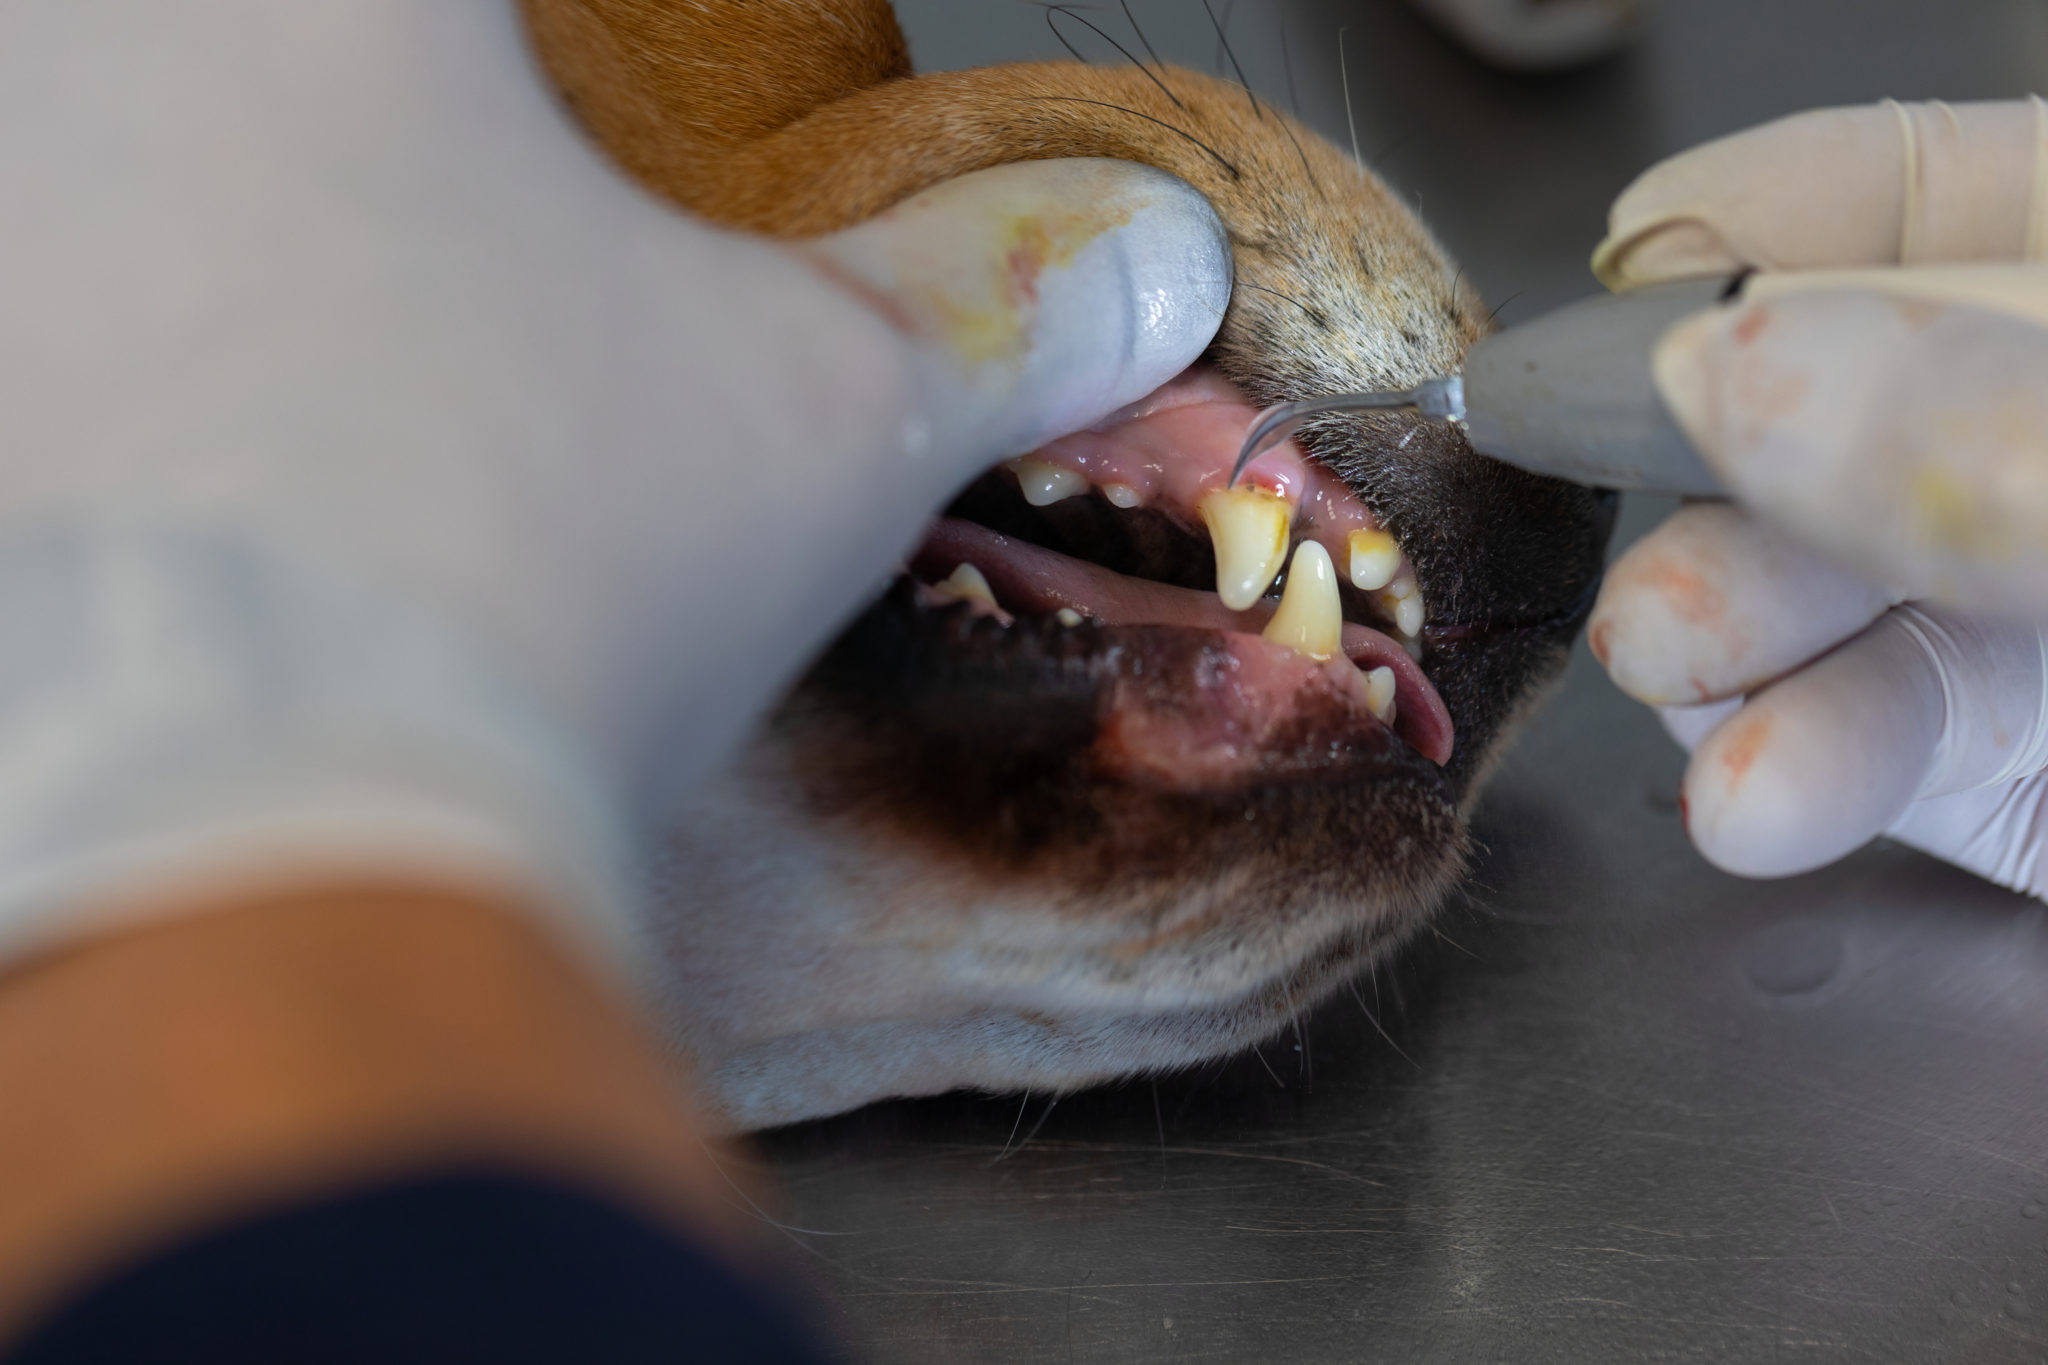 Cleaning a dog's teeth